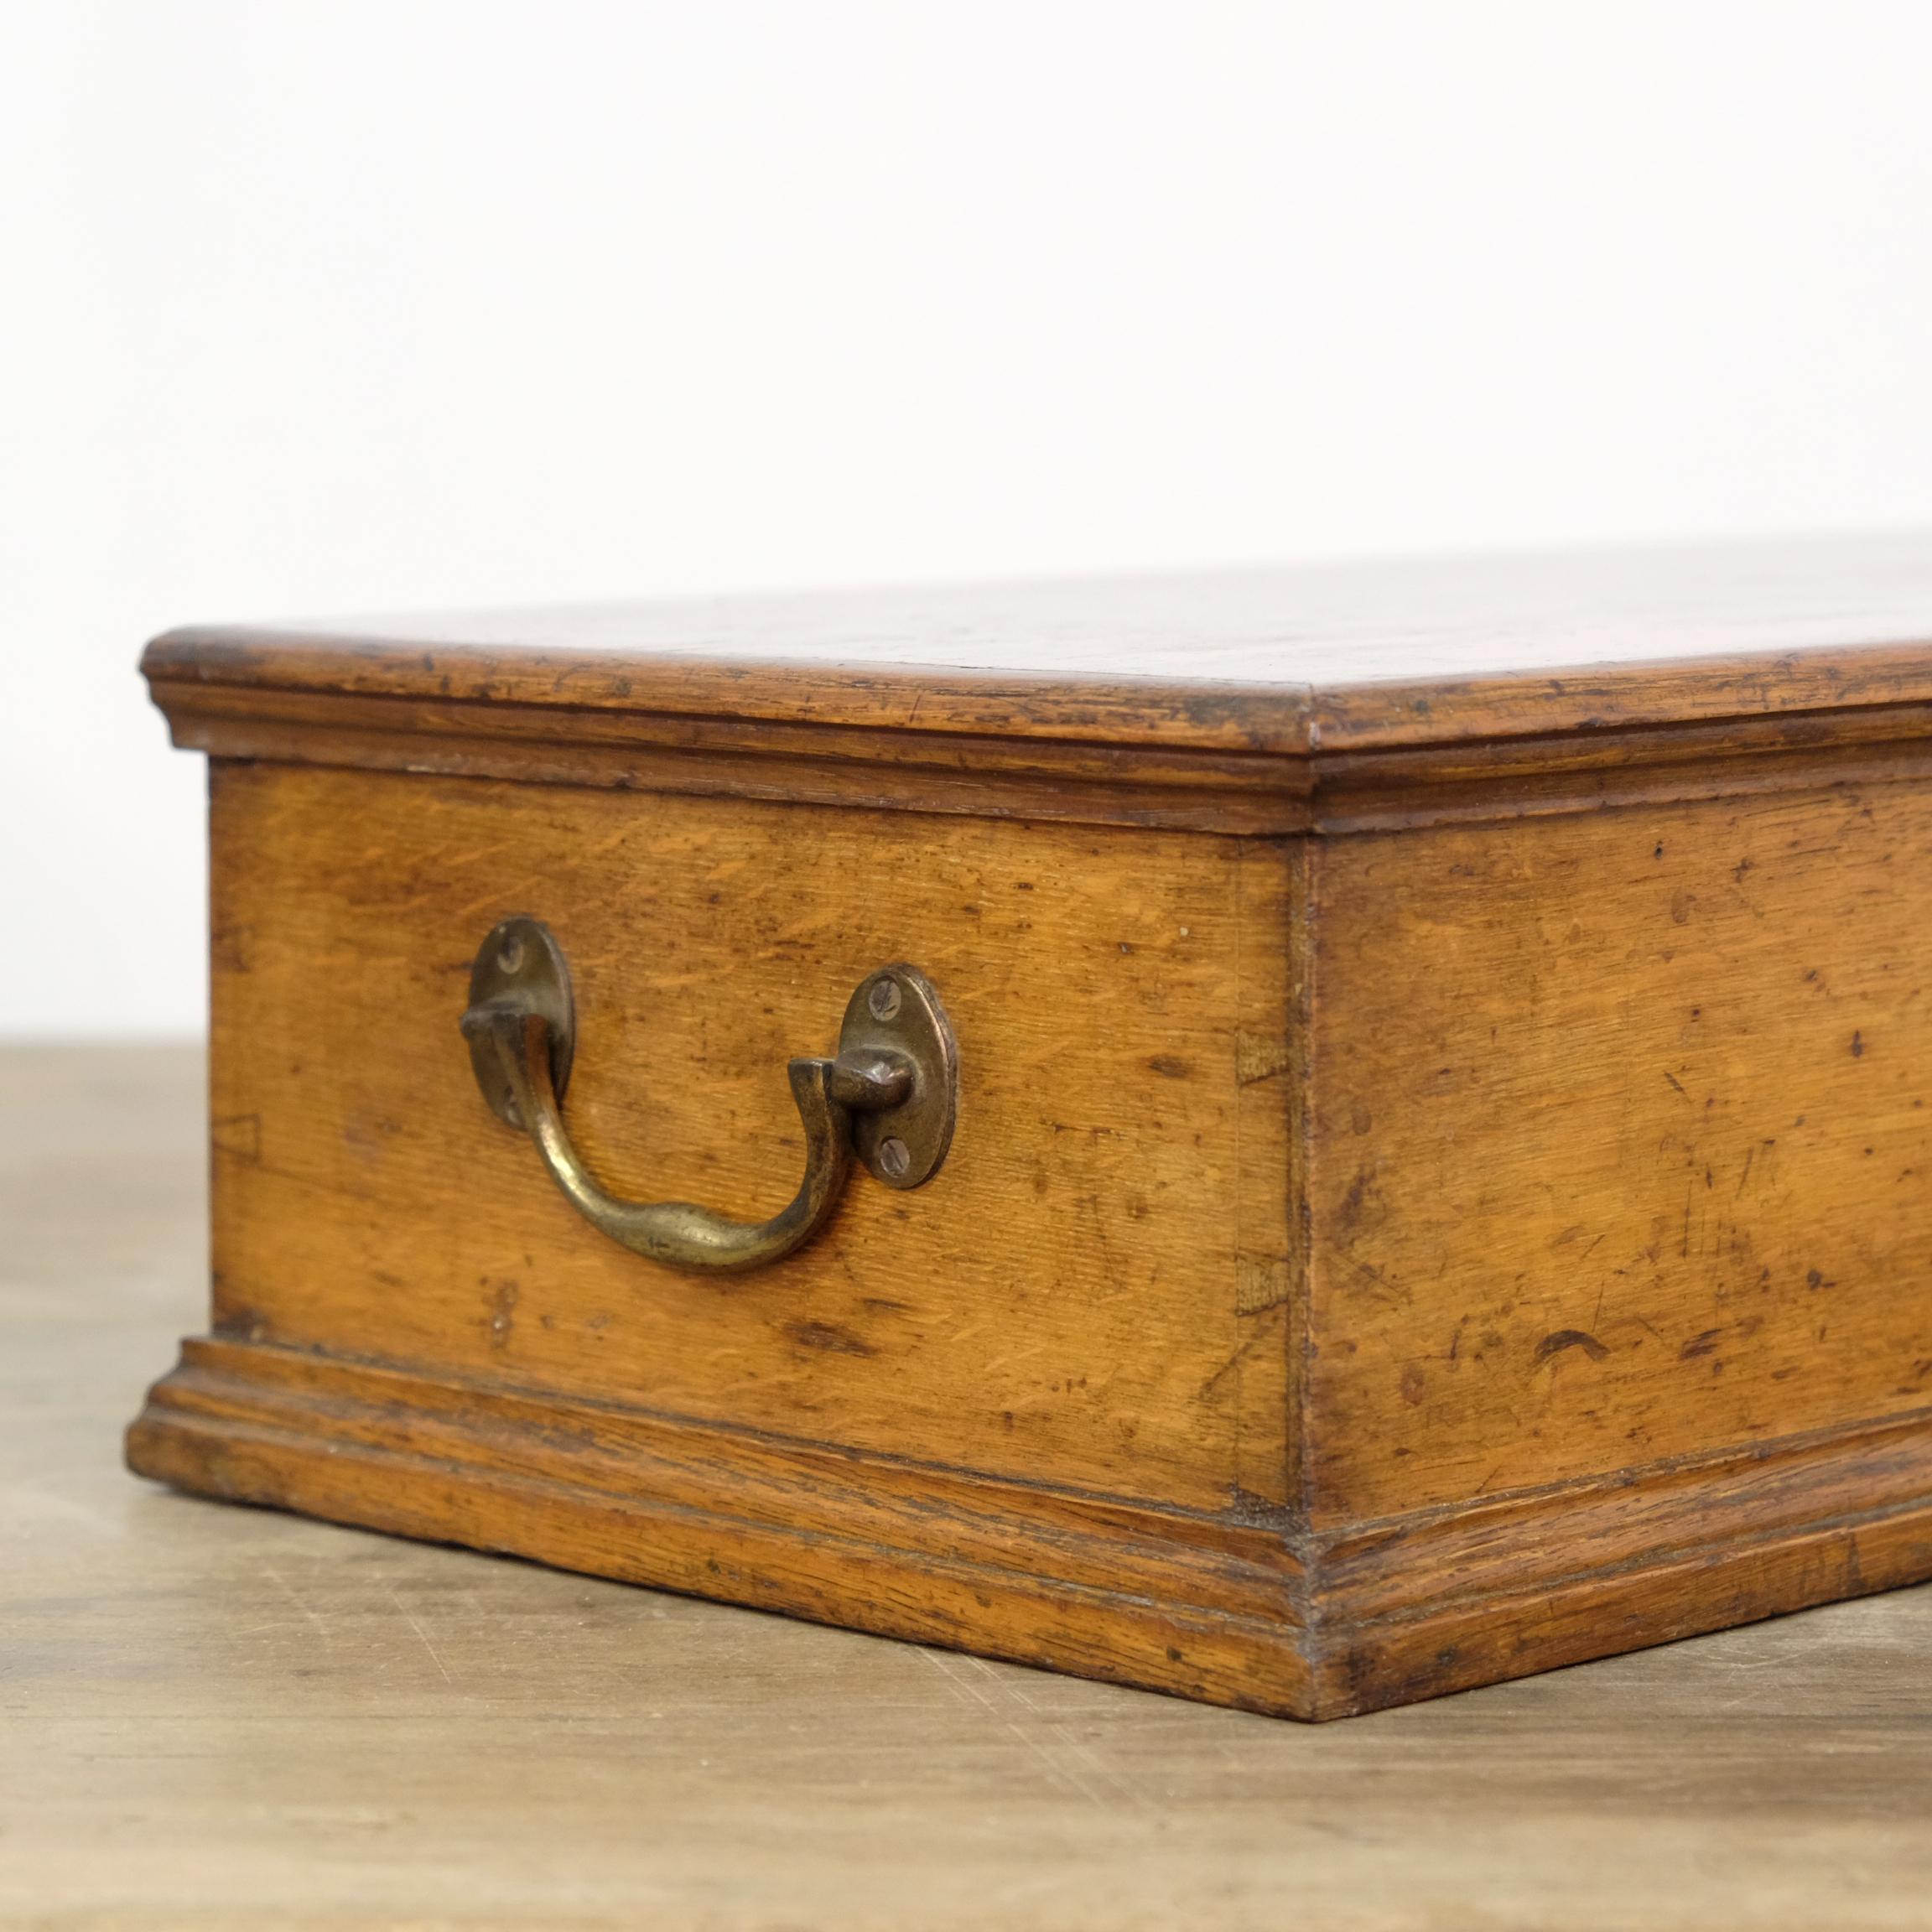 This wonderful quarter-sawn oak ‘Gentleman’s Tool Chest’ with rare original maker’s label is quintessentially English. Made circa 1830, by William Brookes & Sons of Sheffield, for the gentlemen of late Georgian society. The oak now has a lovely rich